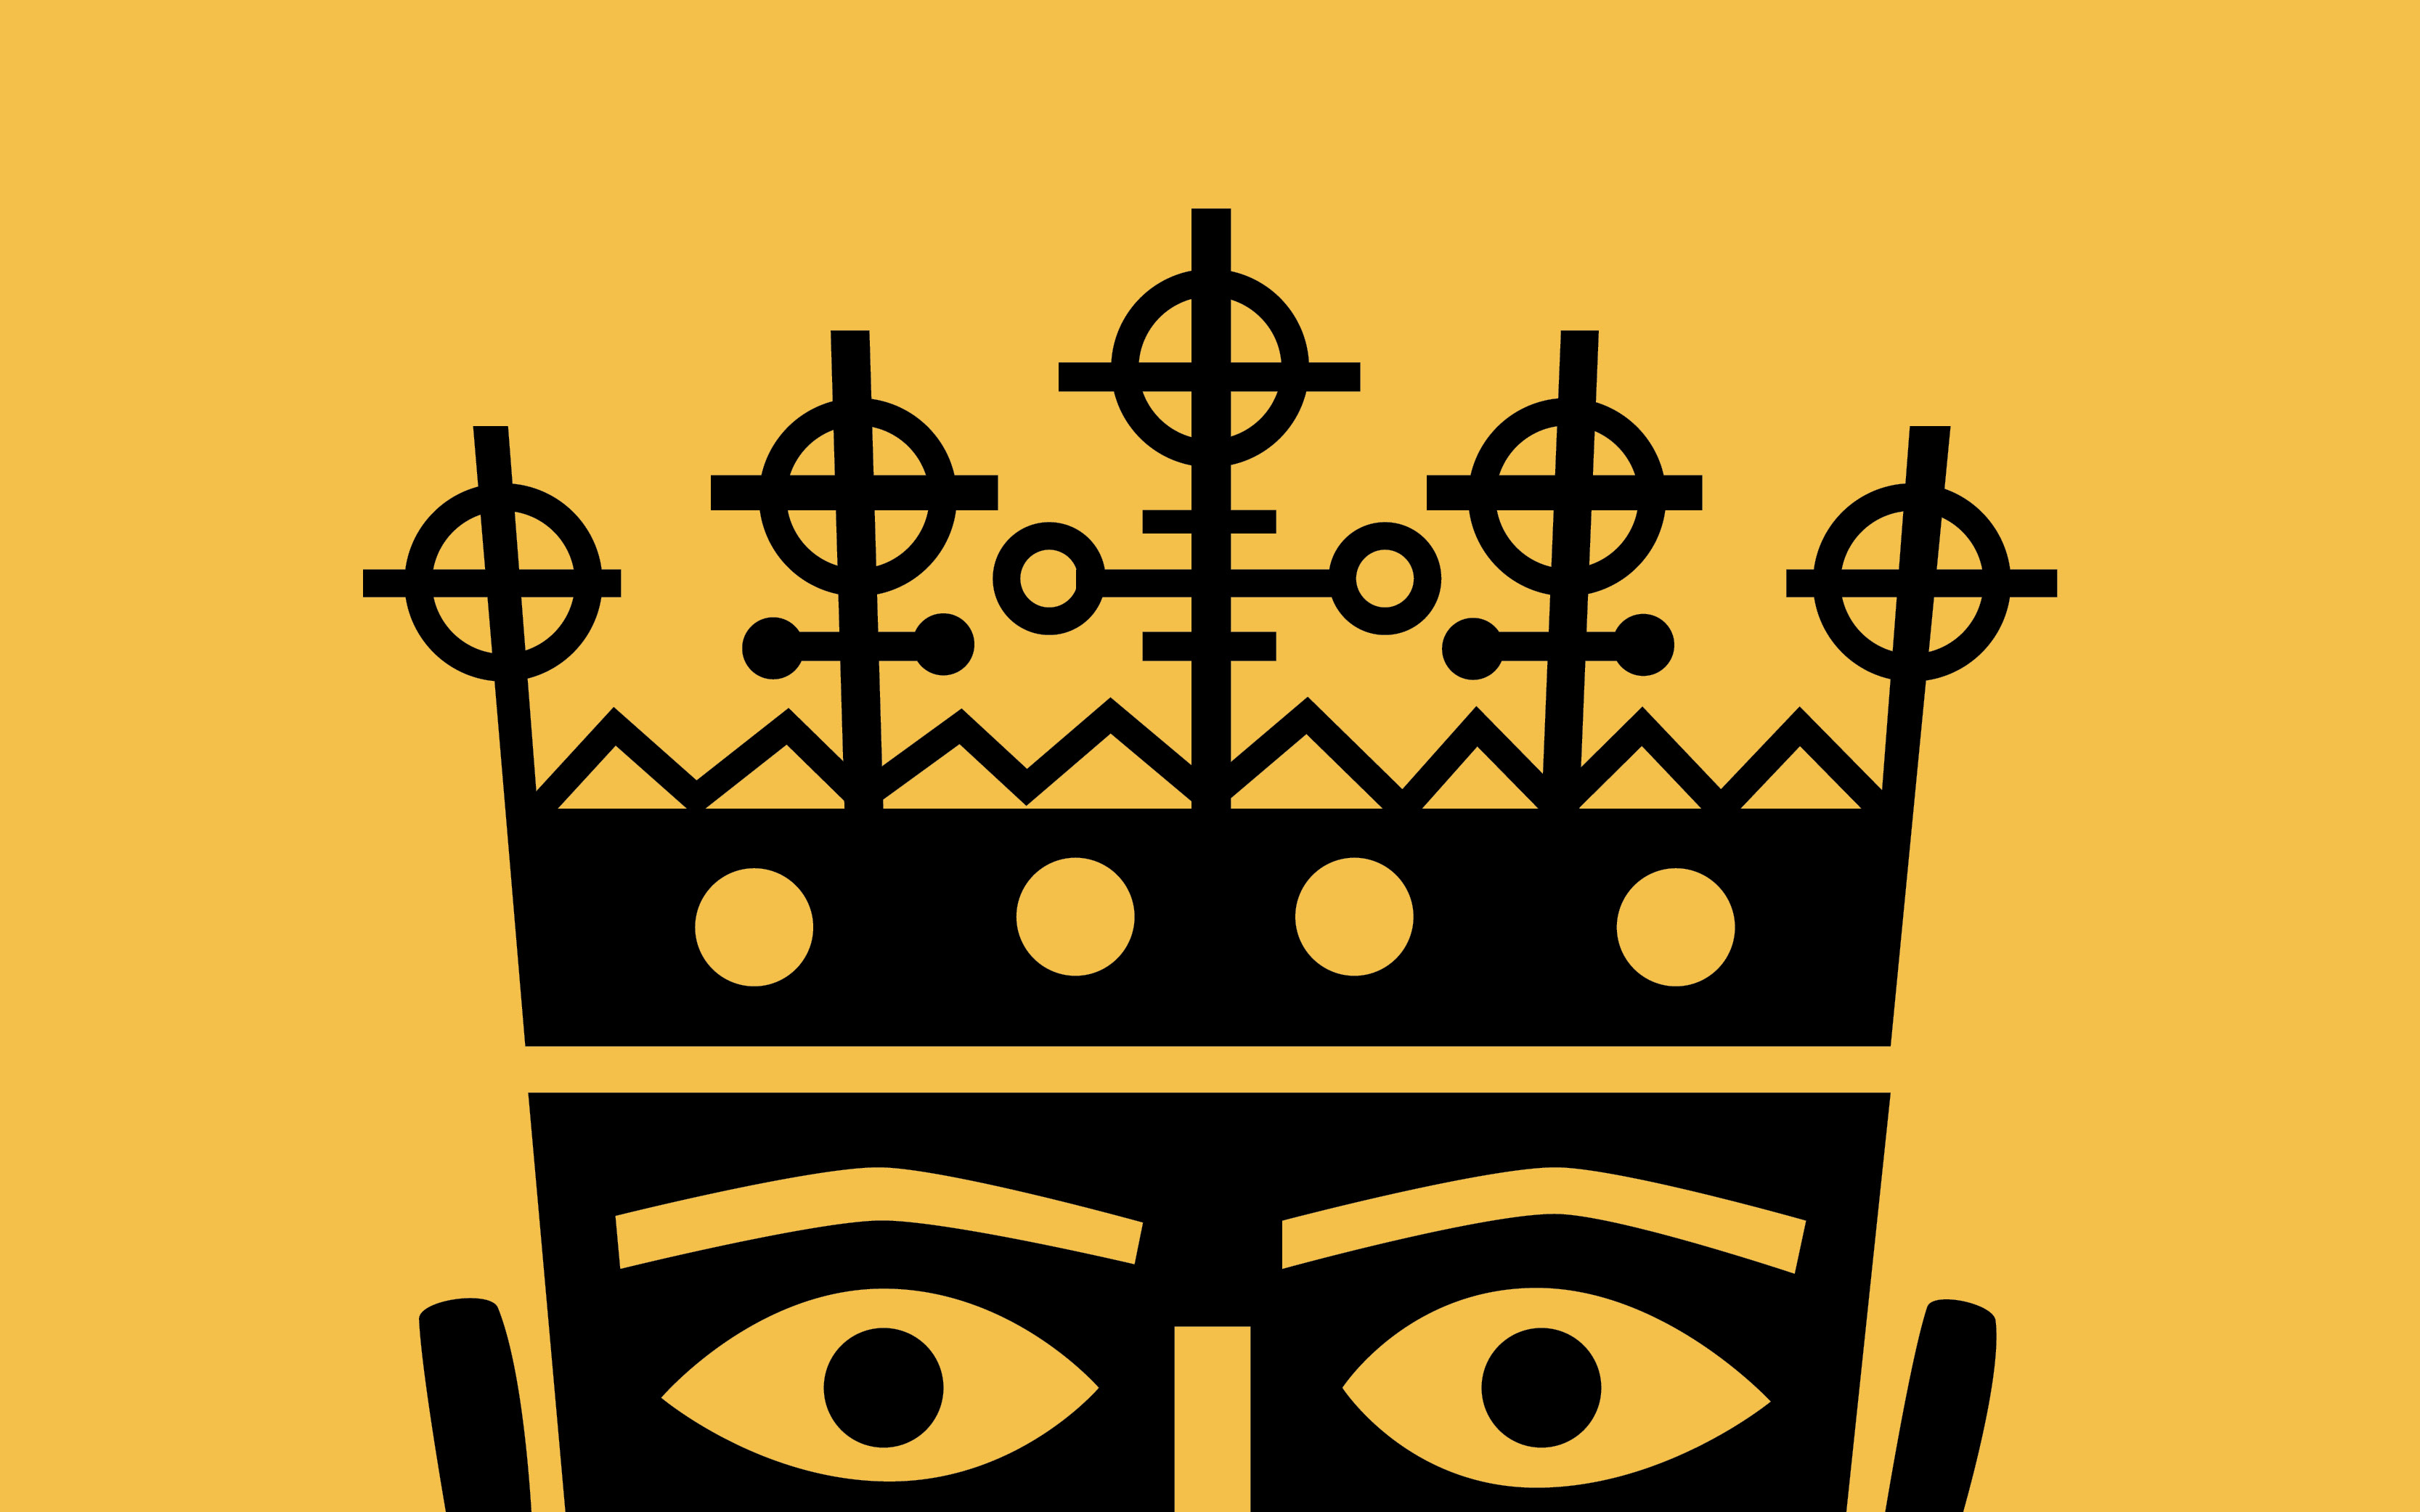 A graphic illustration of a head wearing a crown in black on a field of gold.